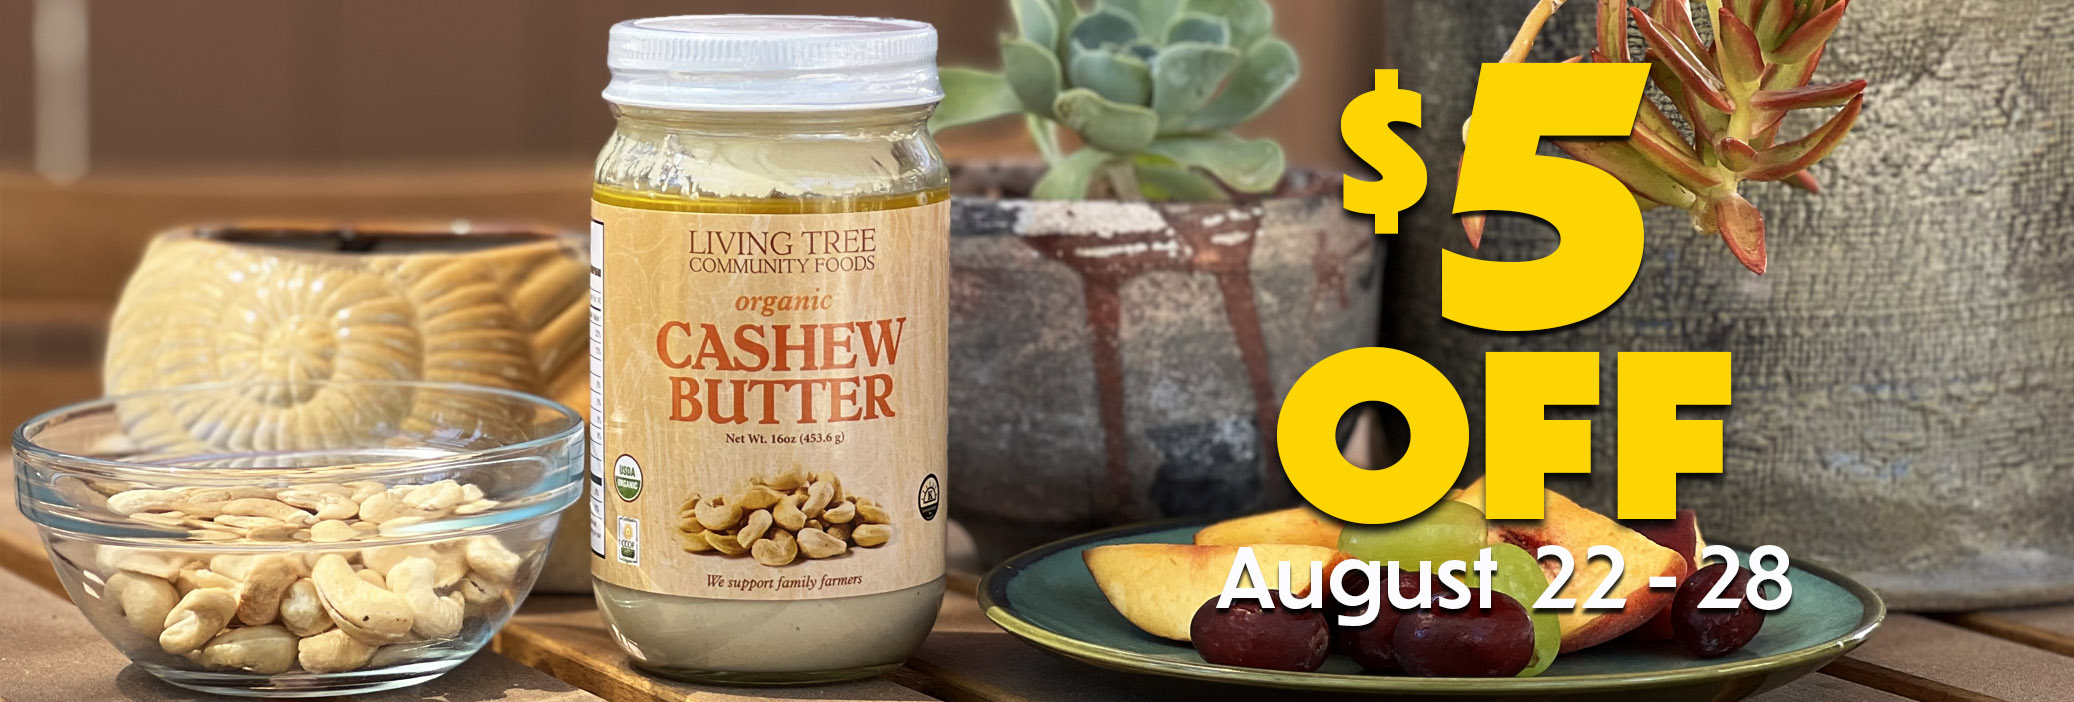 Cashew Butter 16oz Weekly Sale Banner